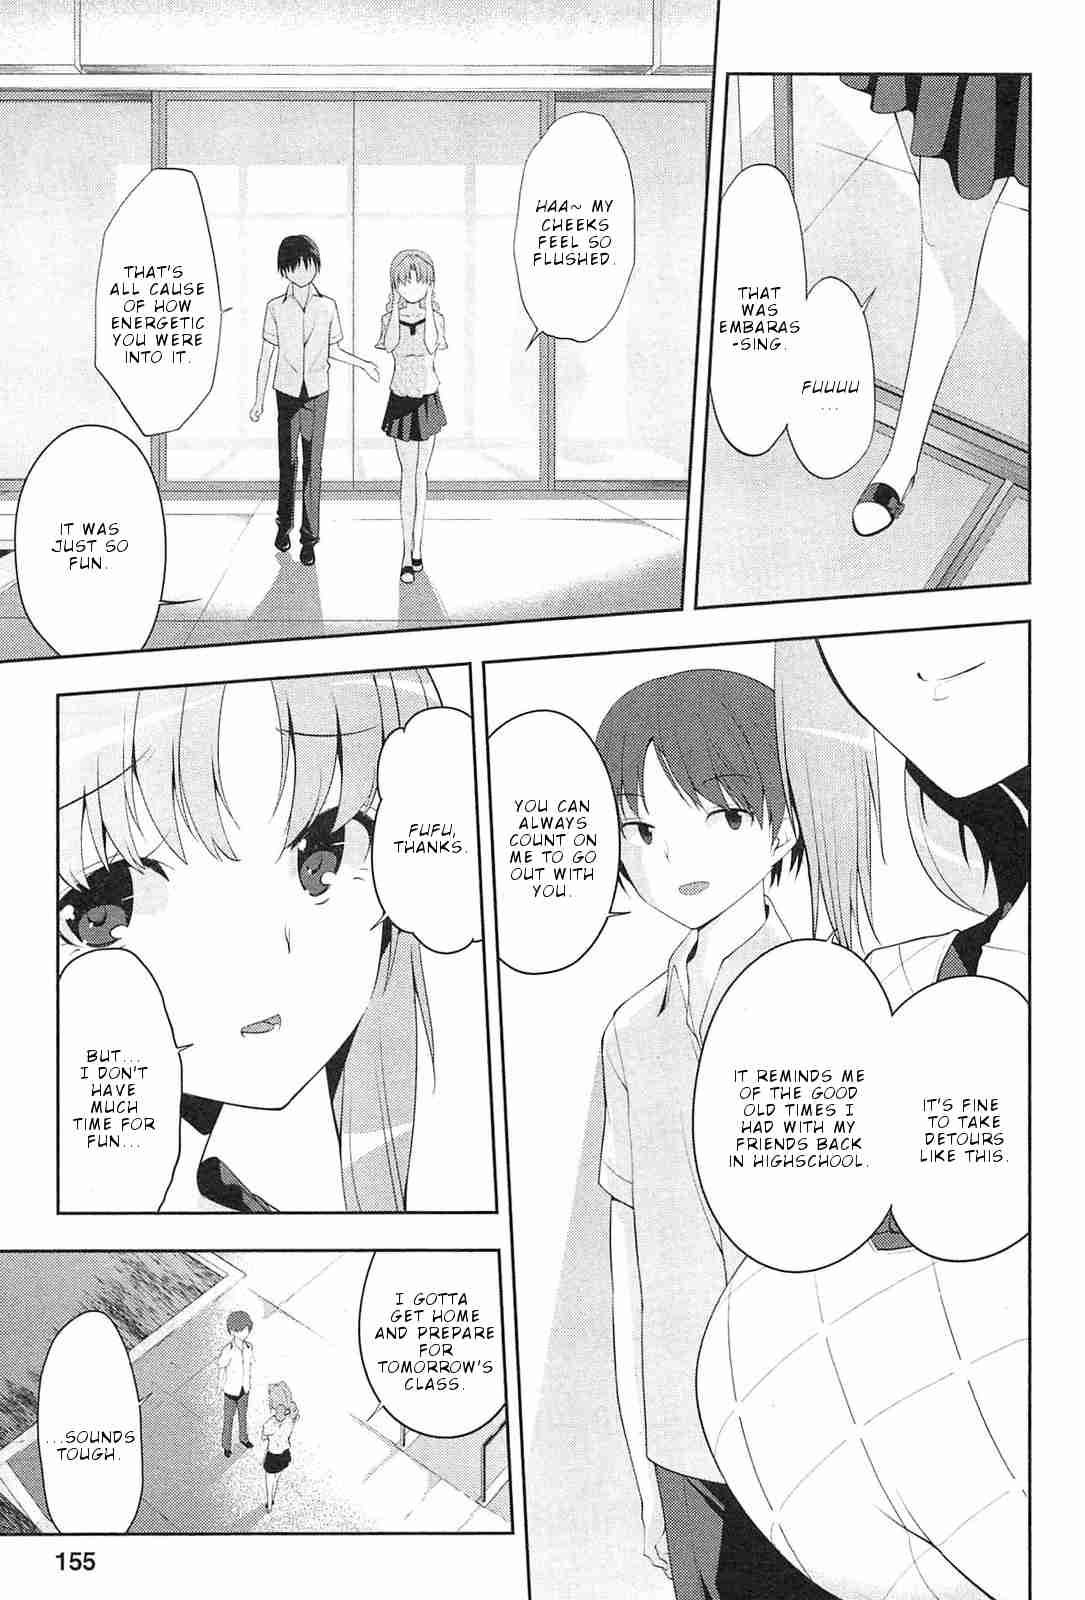 Photo Kano Memorial Pictures Vol. 1 Ch. 6 First School Date!